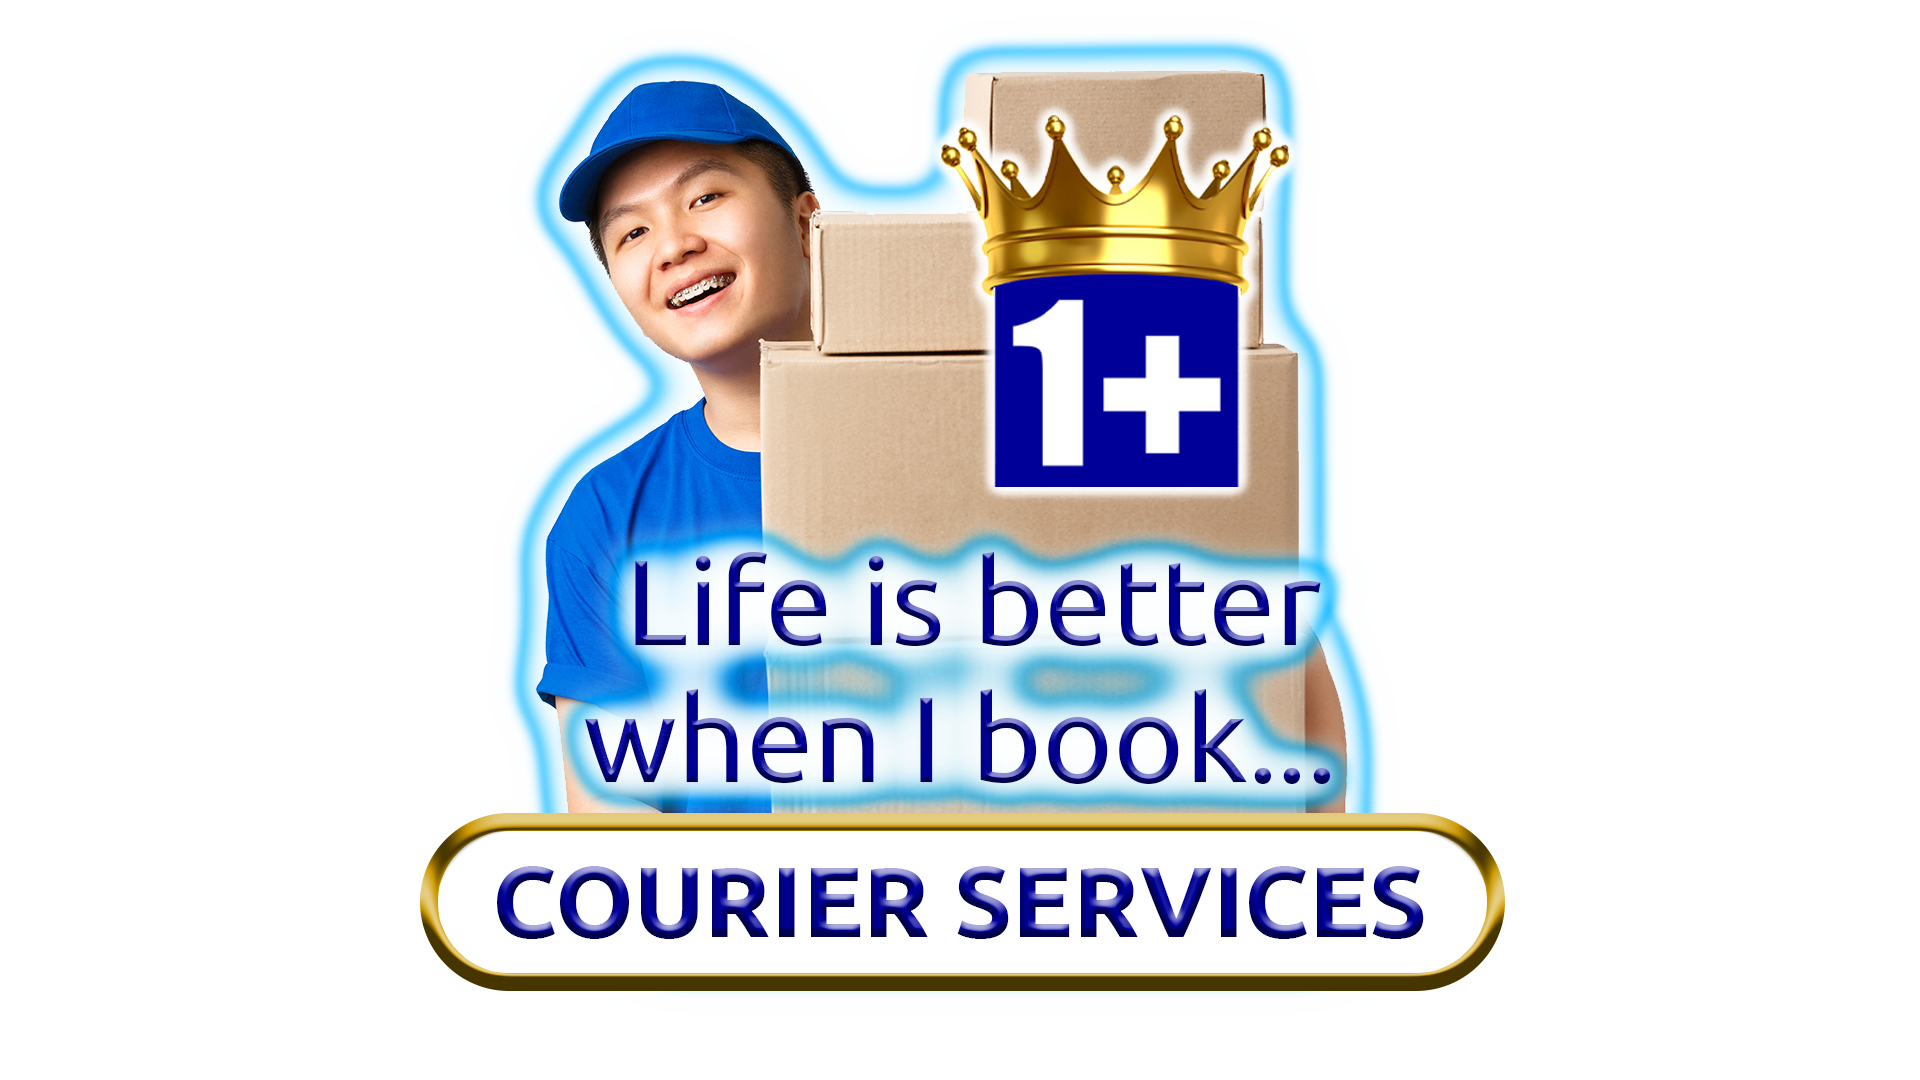 Masterful Couriers Services By 1Movers Moving Movers Move Houston Texas Nassau Bay Texas Seabrook Texas Kemah Texas 8.2.1 | Courier Services